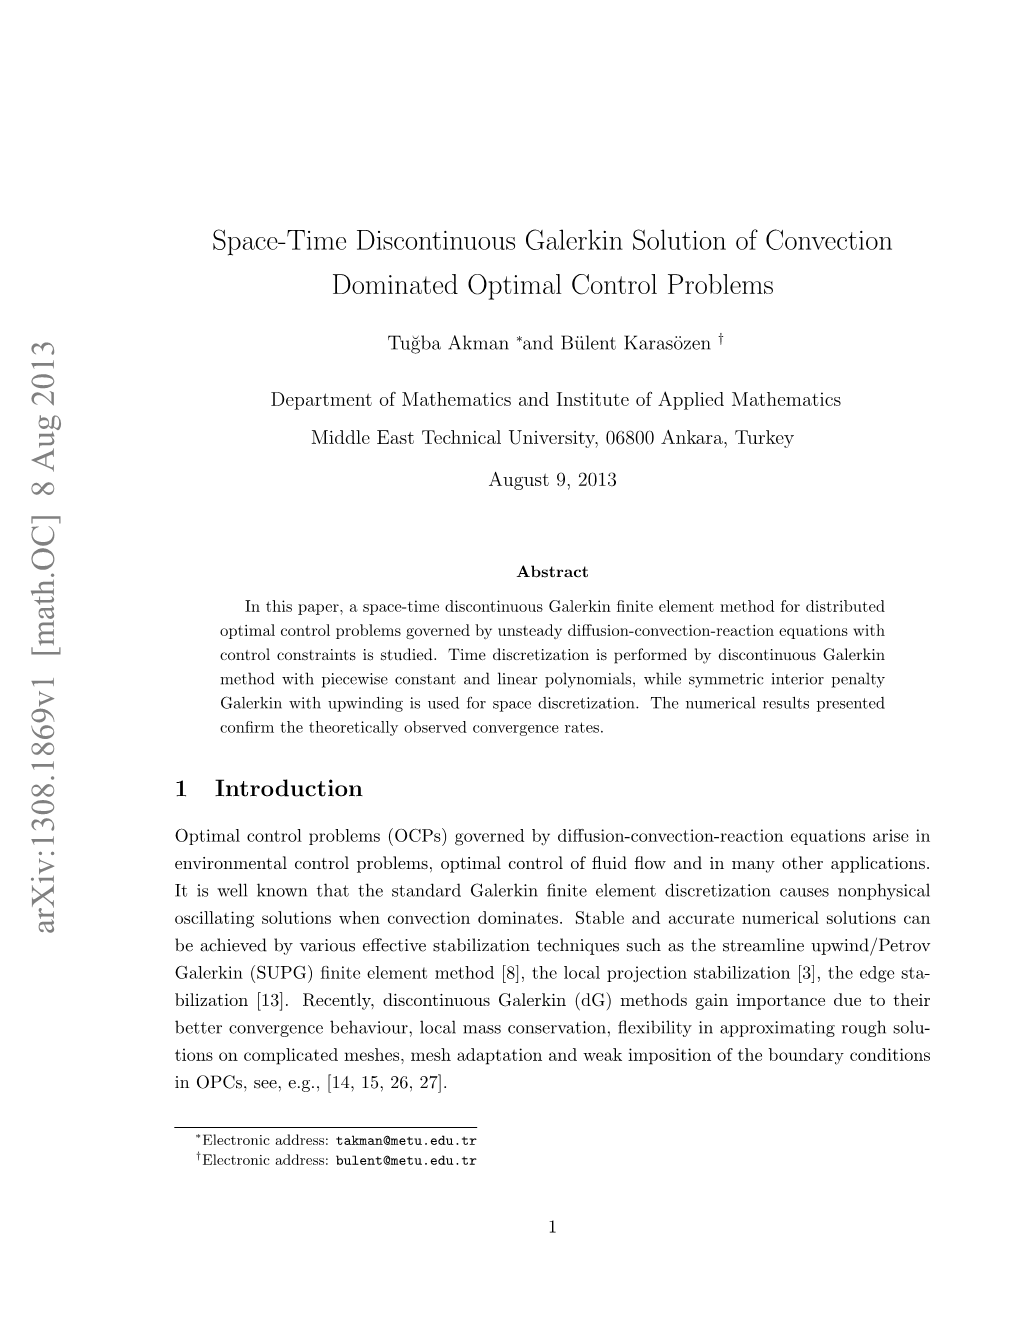 Space-Time Discontinuous Galerkin Solution of Convection Dominated Optimal Control Problems